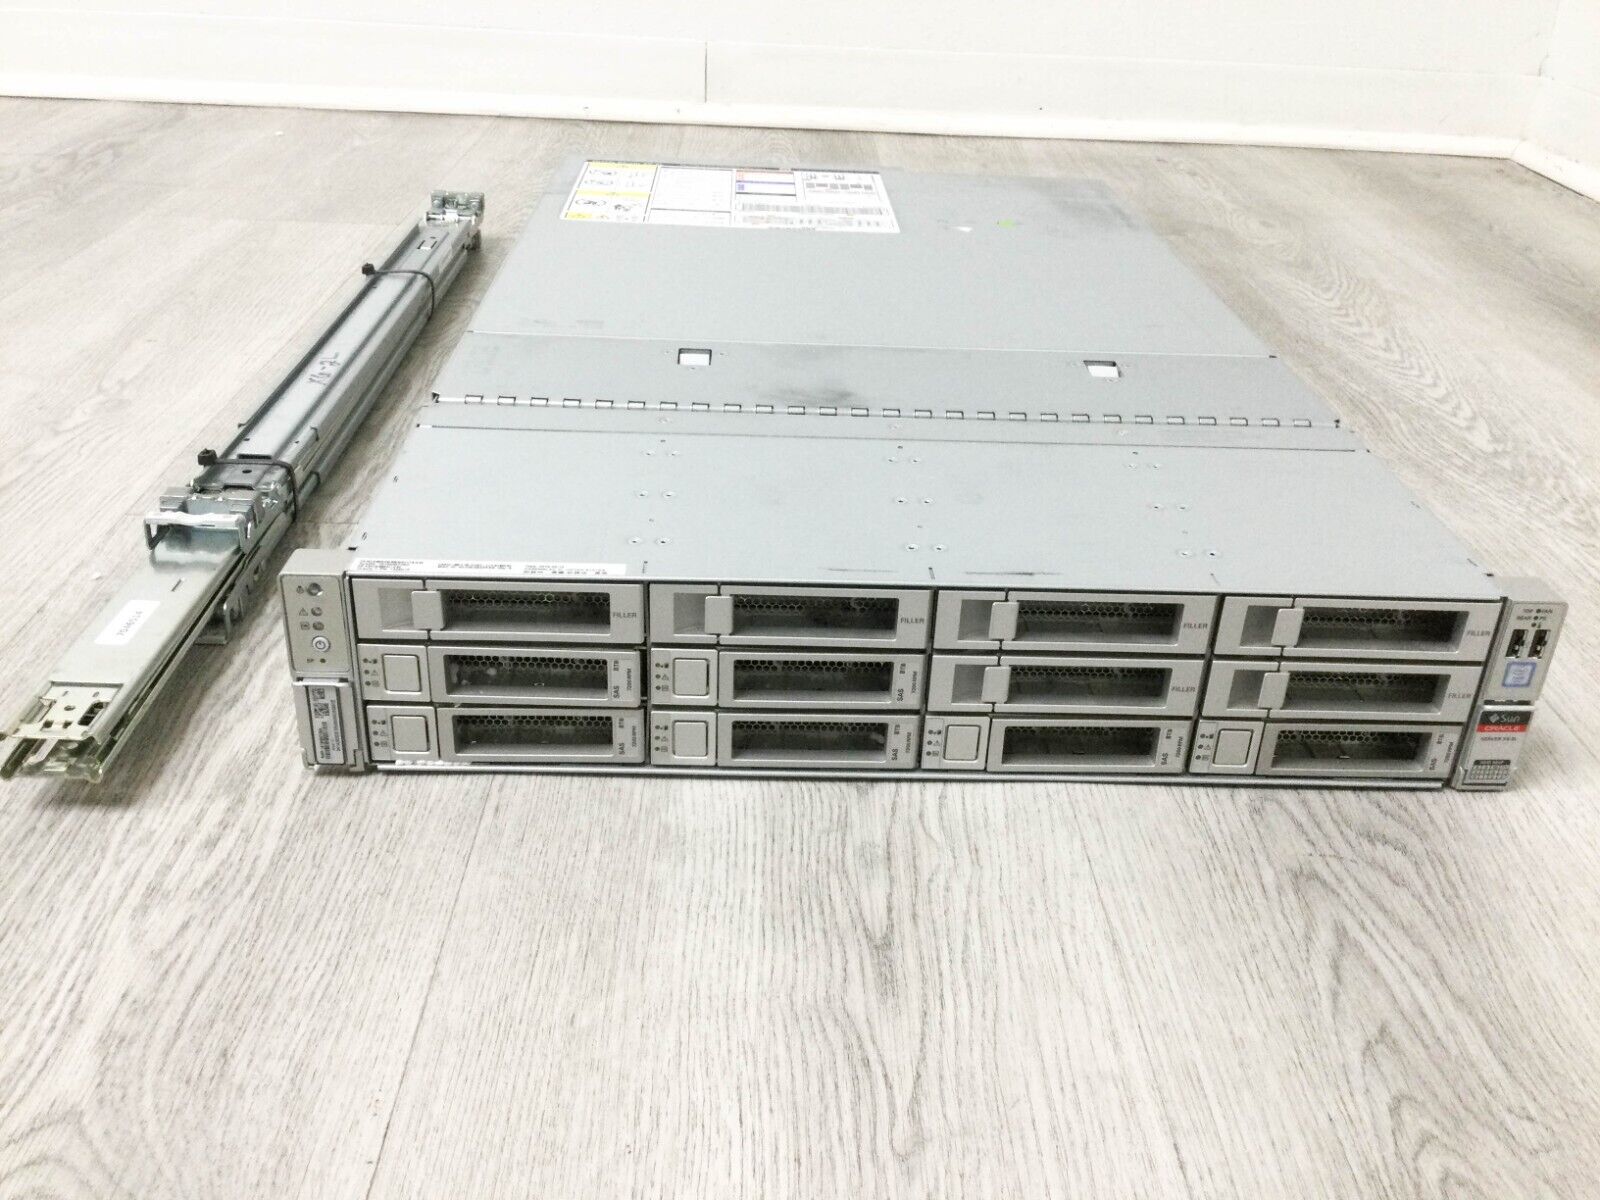 Sun Oracle X6-2L Server 7328019 w/ PSUs & Rack Rails, No HDDs/ CPUs/ RAMs/ Cards